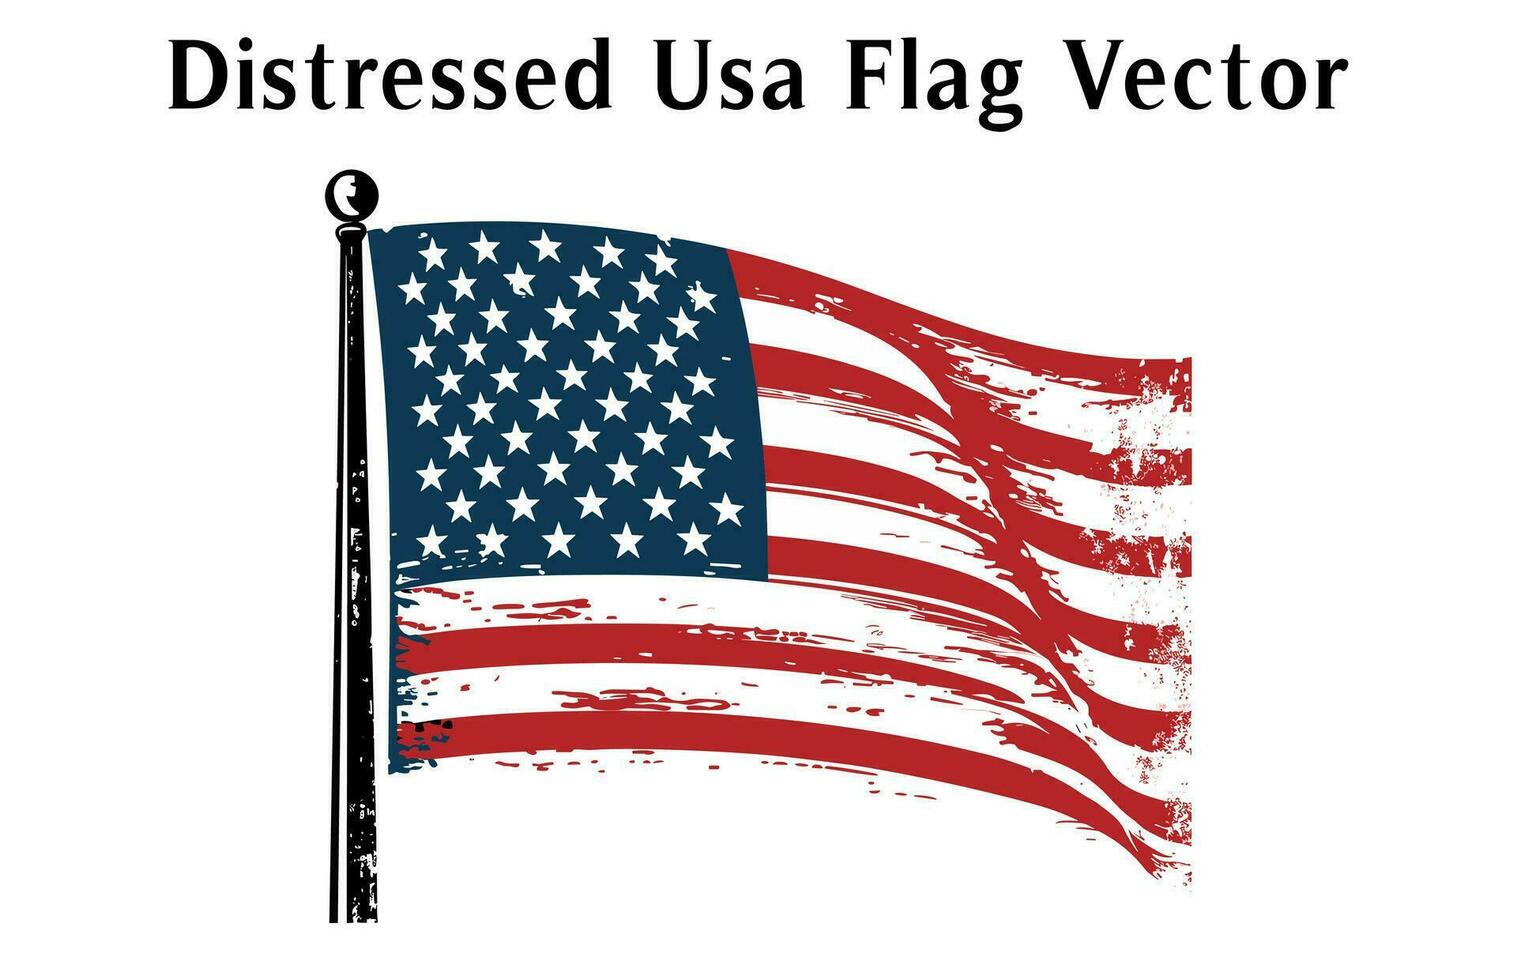 Distressed USA Flag vector illustration, American Flag vector clipart isolated on a white Background